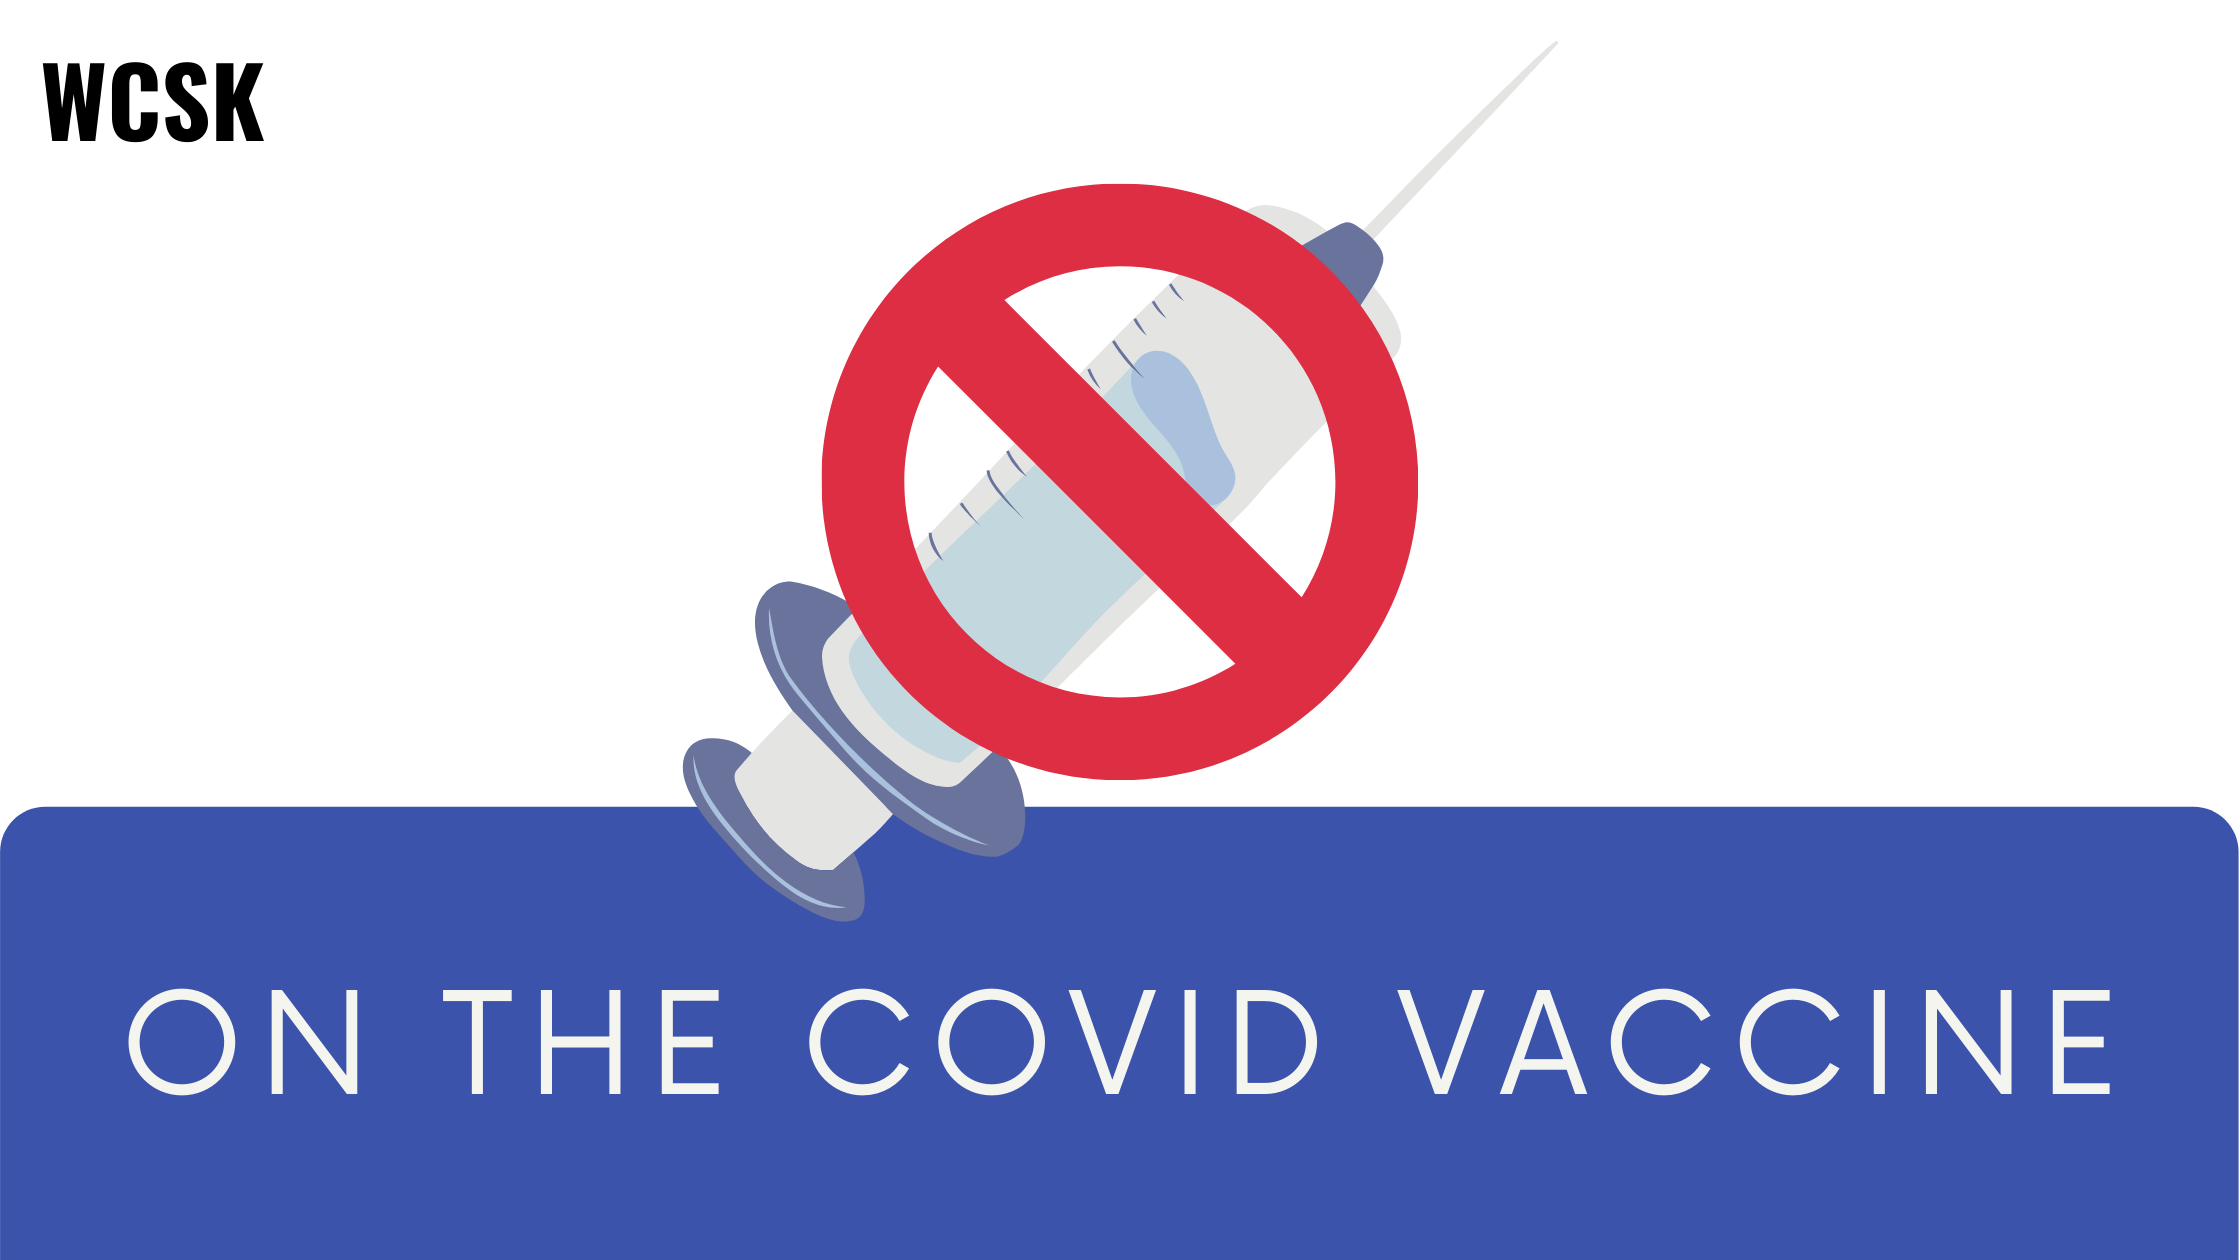 Reasons Why Not to Get the COVID Vaccine